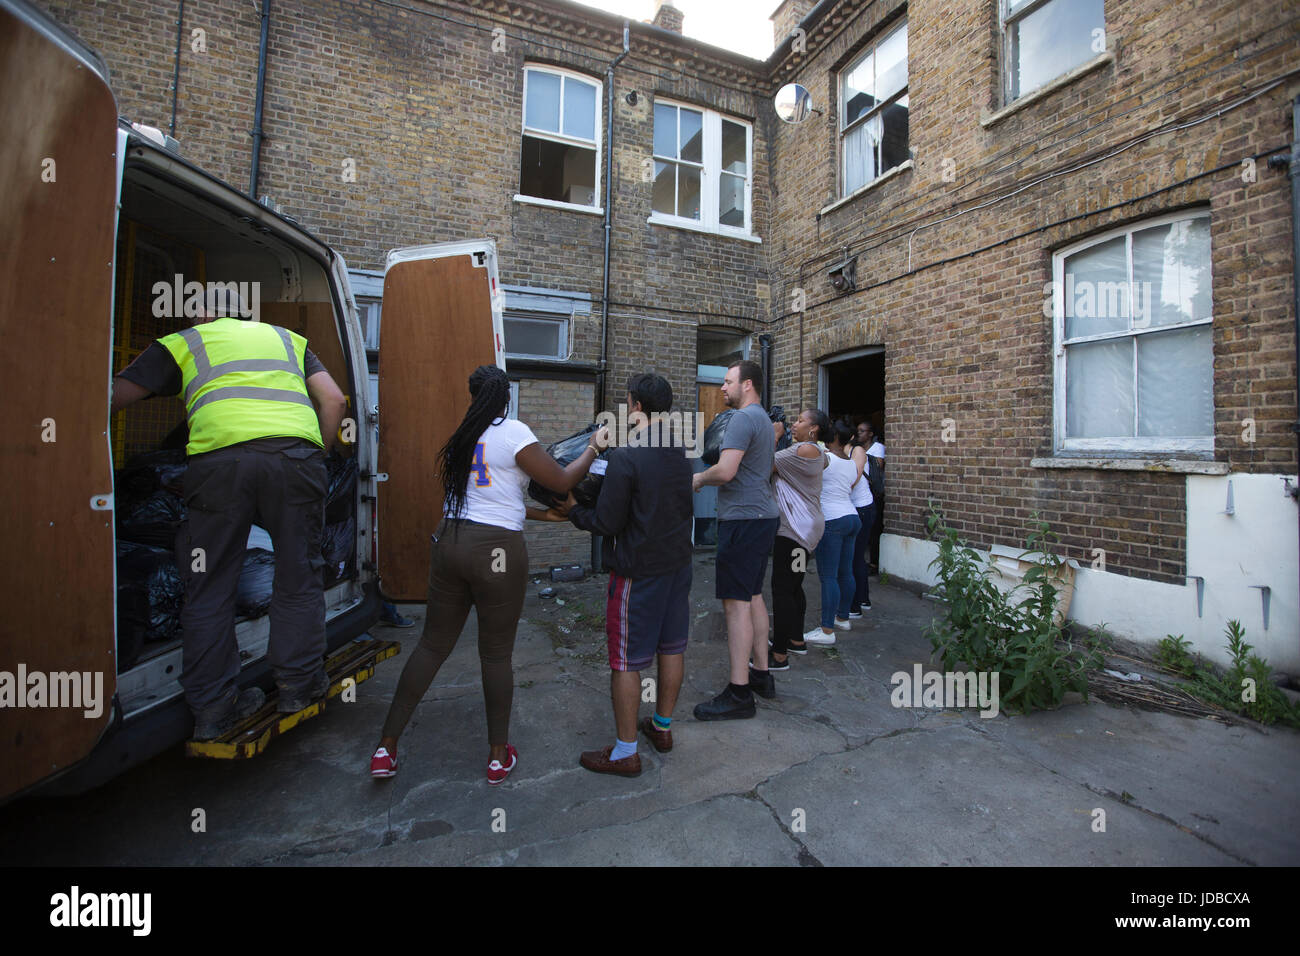 Local community dispensing food and clothes to help aid the victims left homeless after the Grenfell Tower fire disaster, West London, UK Stock Photo